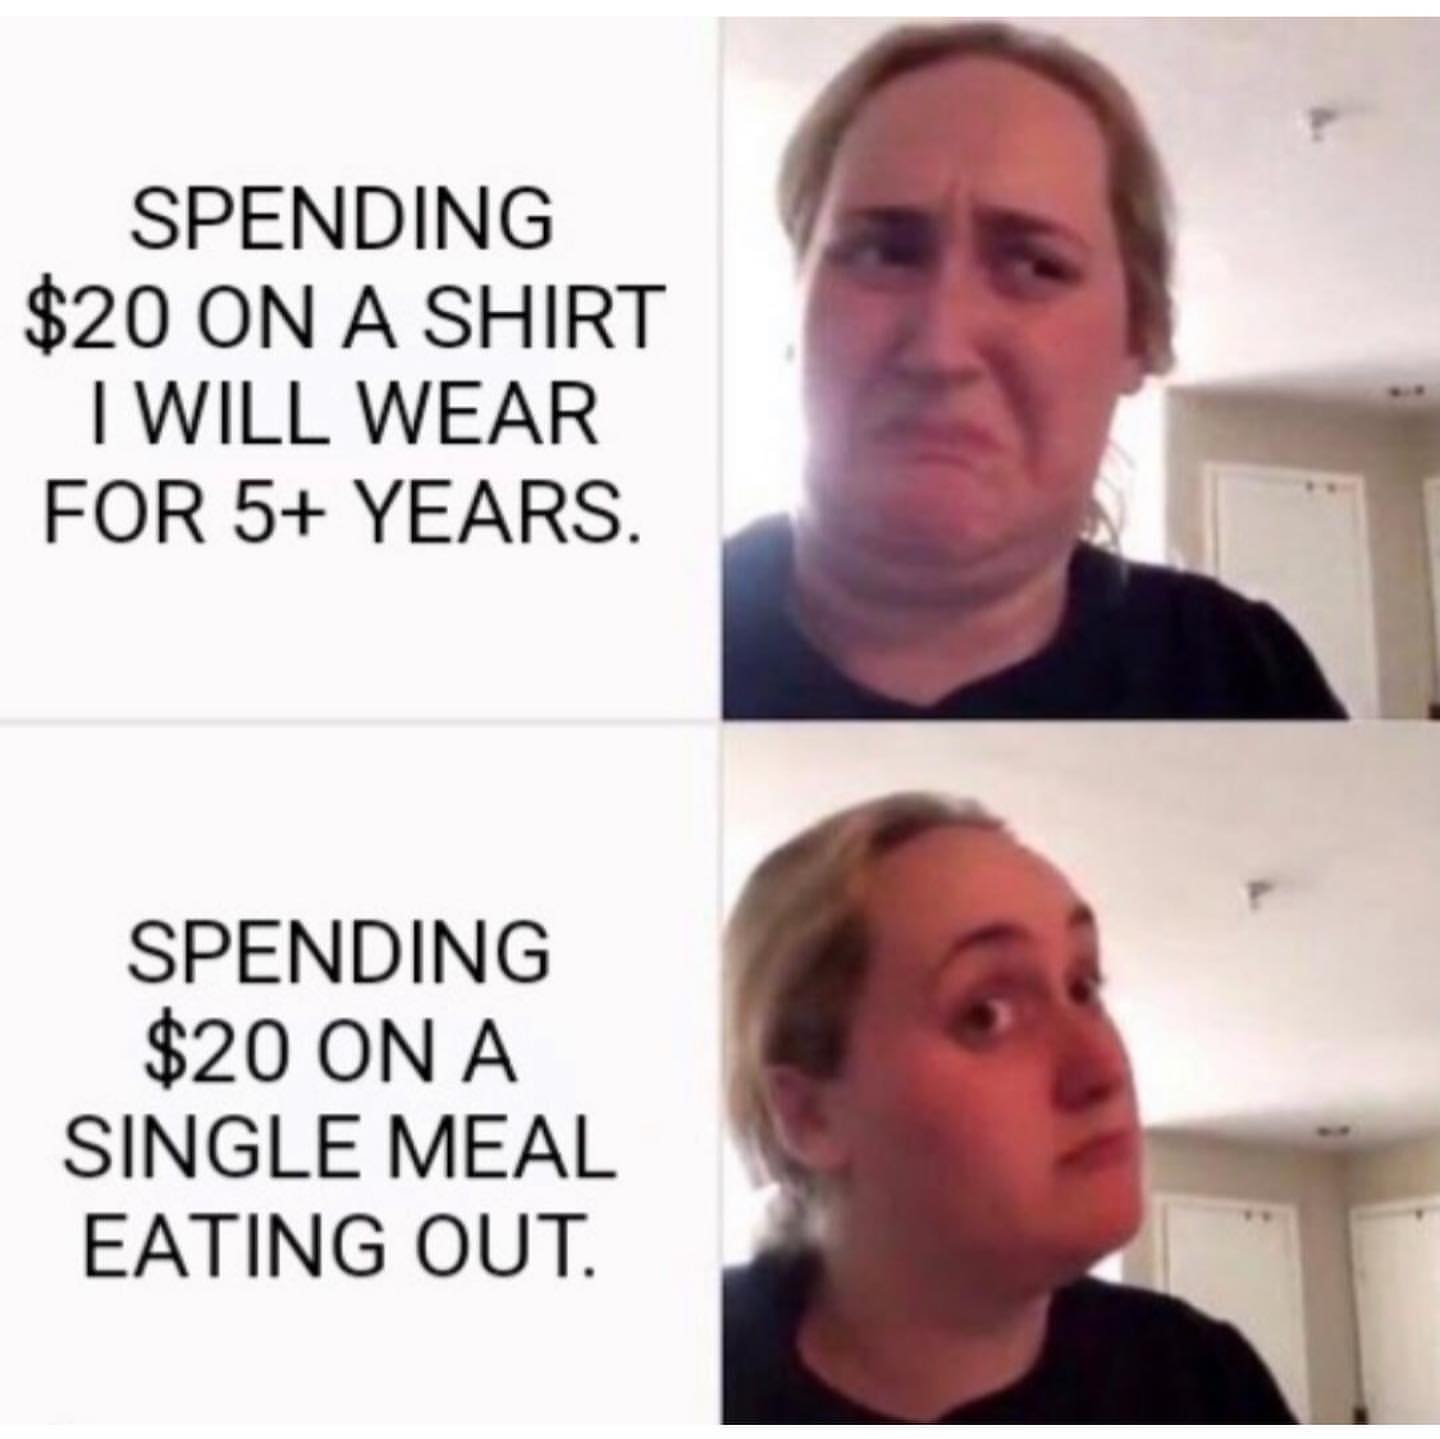 Spending $20 on a shirt I will wear for 5+ years. Spending $20 on a single meal eating out.